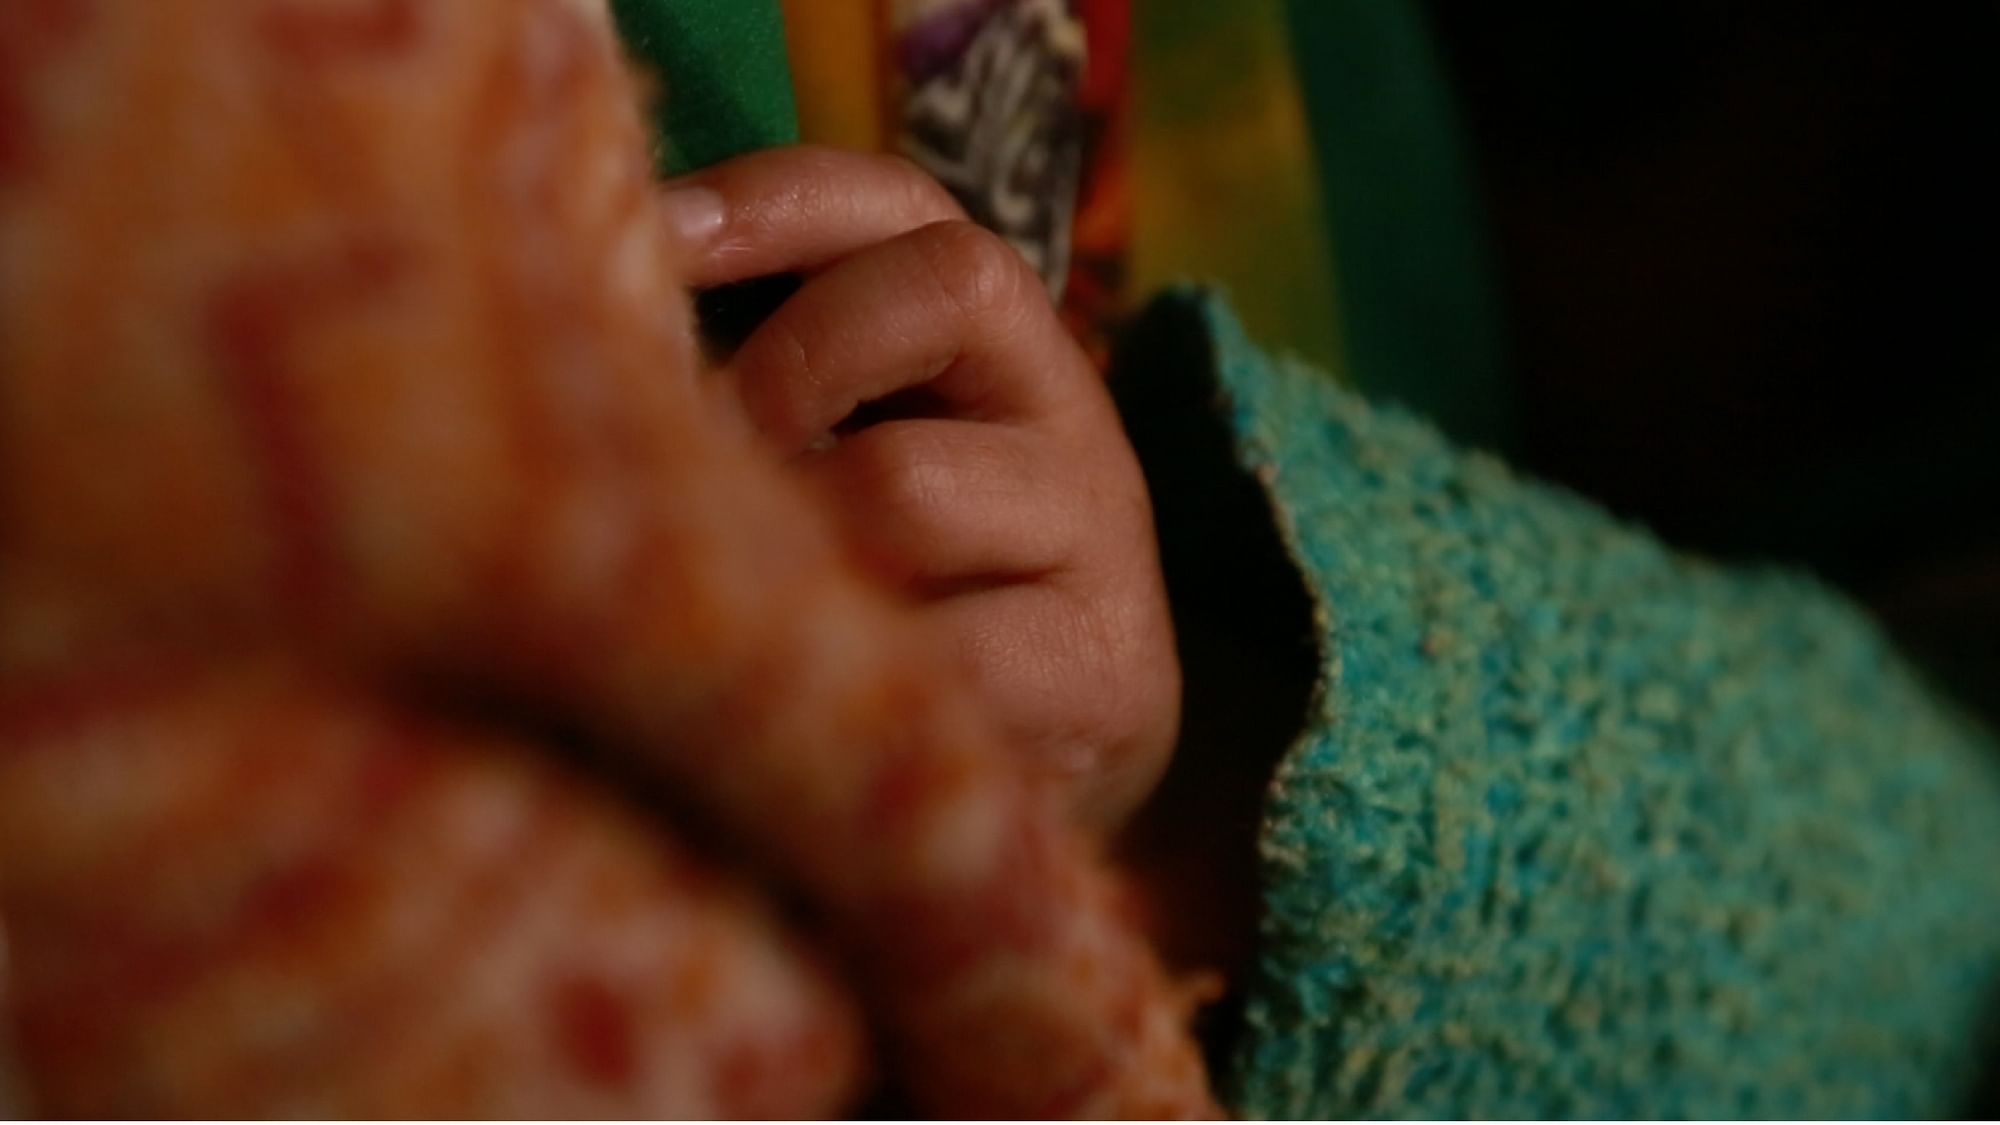 On 16 February, The Quint, in association with BitGiving, started a <a href="https://www.bitgiving.com/chhutki">crowdfunding campaign</a> to #HelpChhutki, an 8-month-old rape survivor.